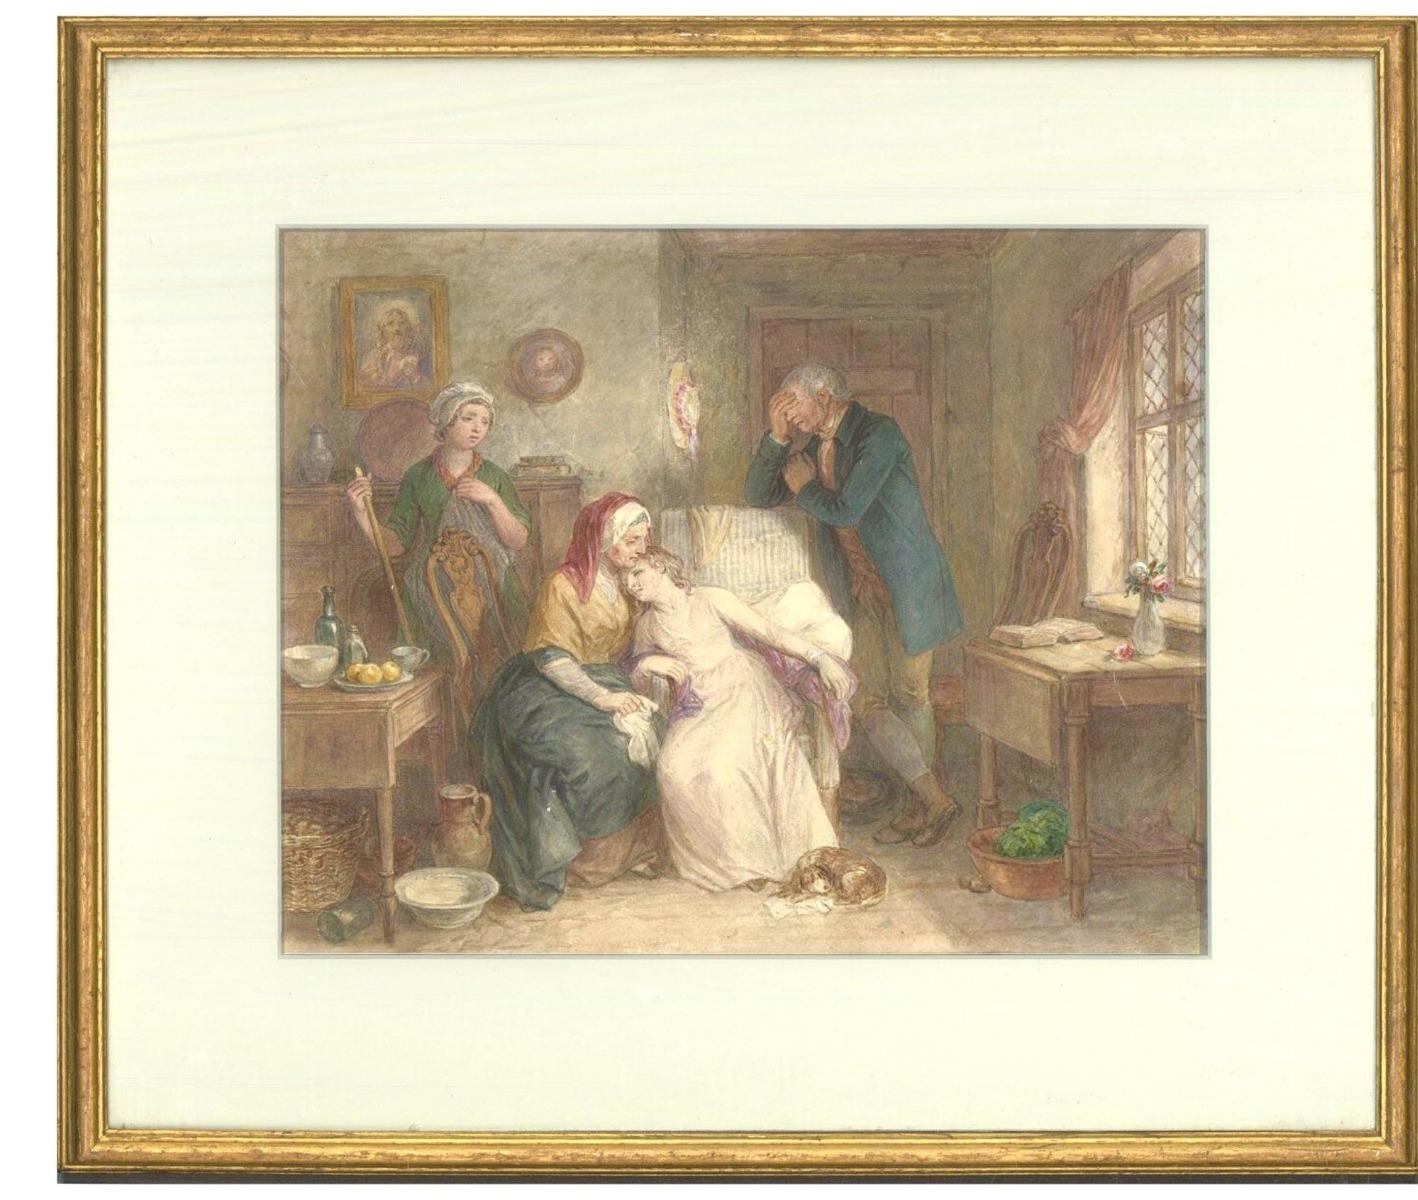 Unknown Figurative Art - 19th Century Watercolour - Figures Mourning